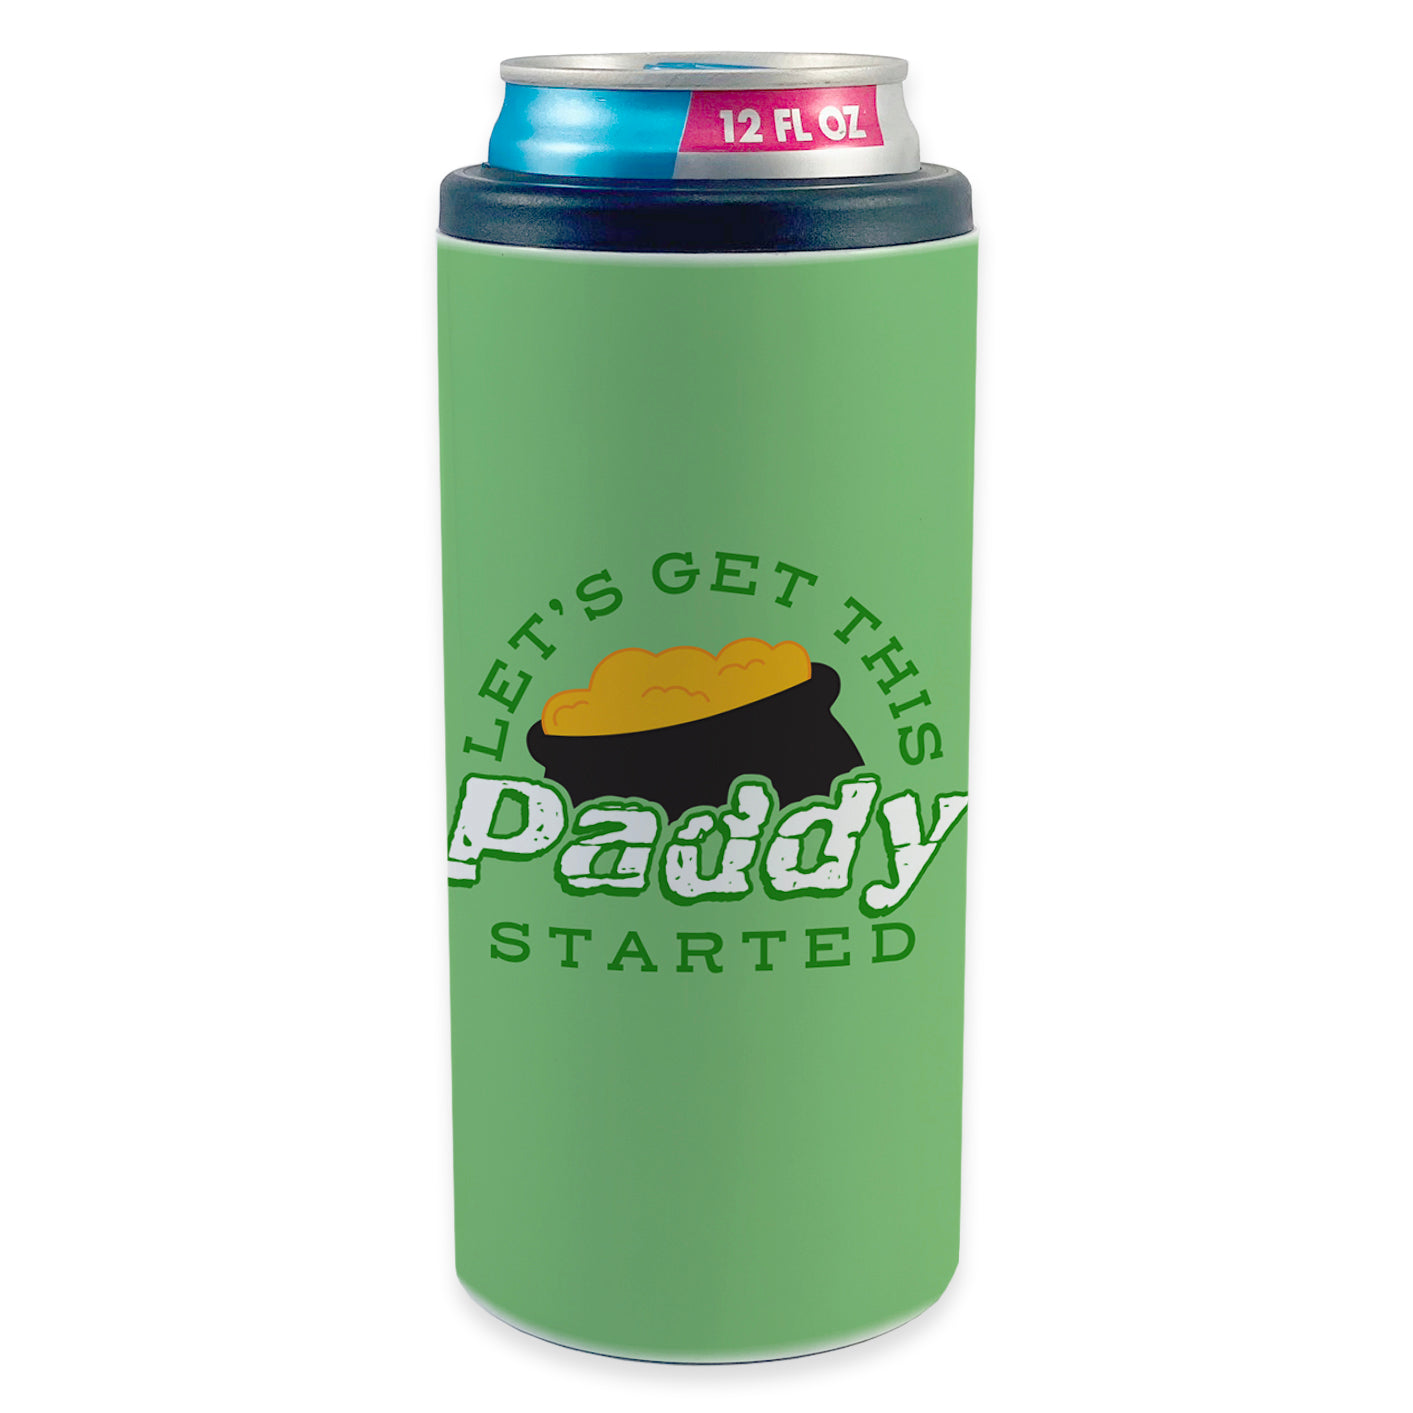 St. Patricks Day Collection (Lets Get This Paddy Started) 12 Oz Slim Can Cooler